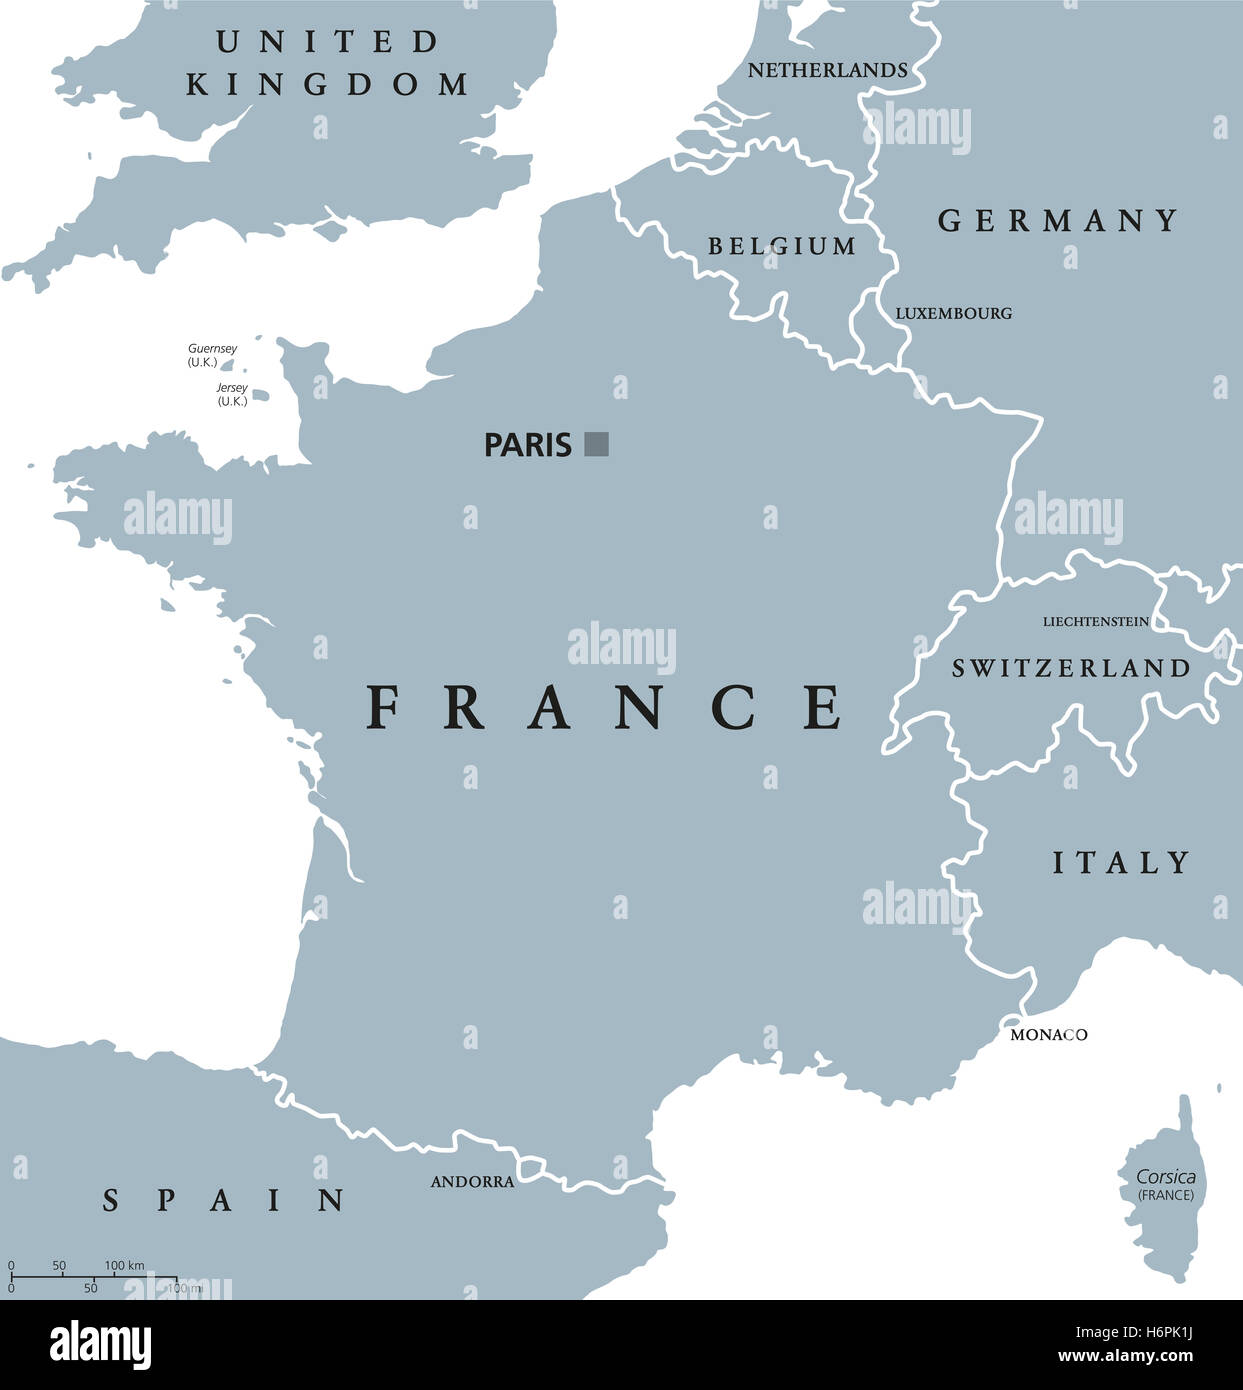 France Political Map With Capital Paris Corsica National Borders